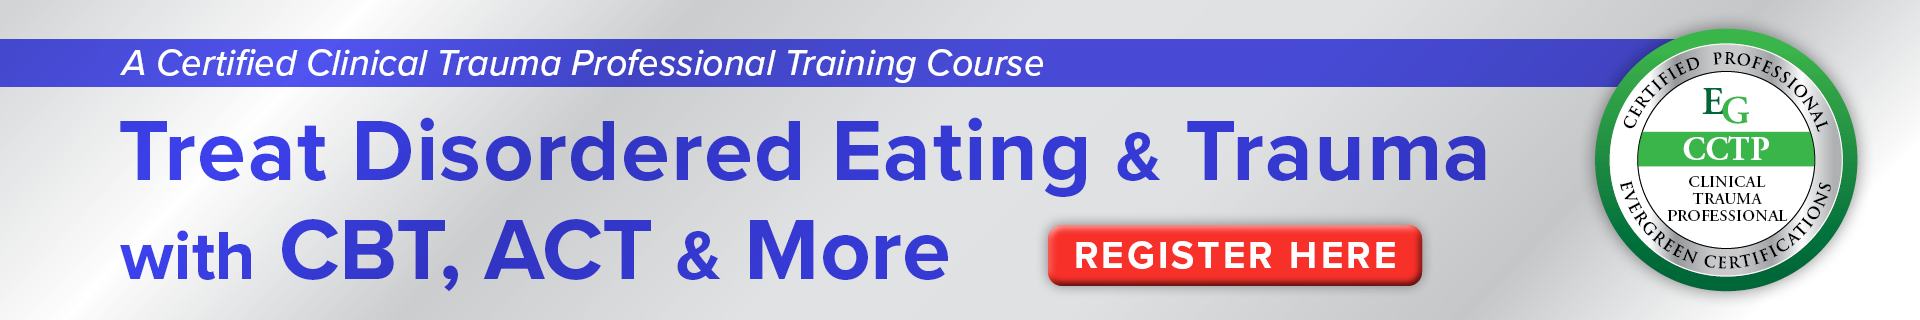 Treat Disordered Eating & Trauma with CBT, ACT & More: A Certified Clinical Trauma Professional Training Course